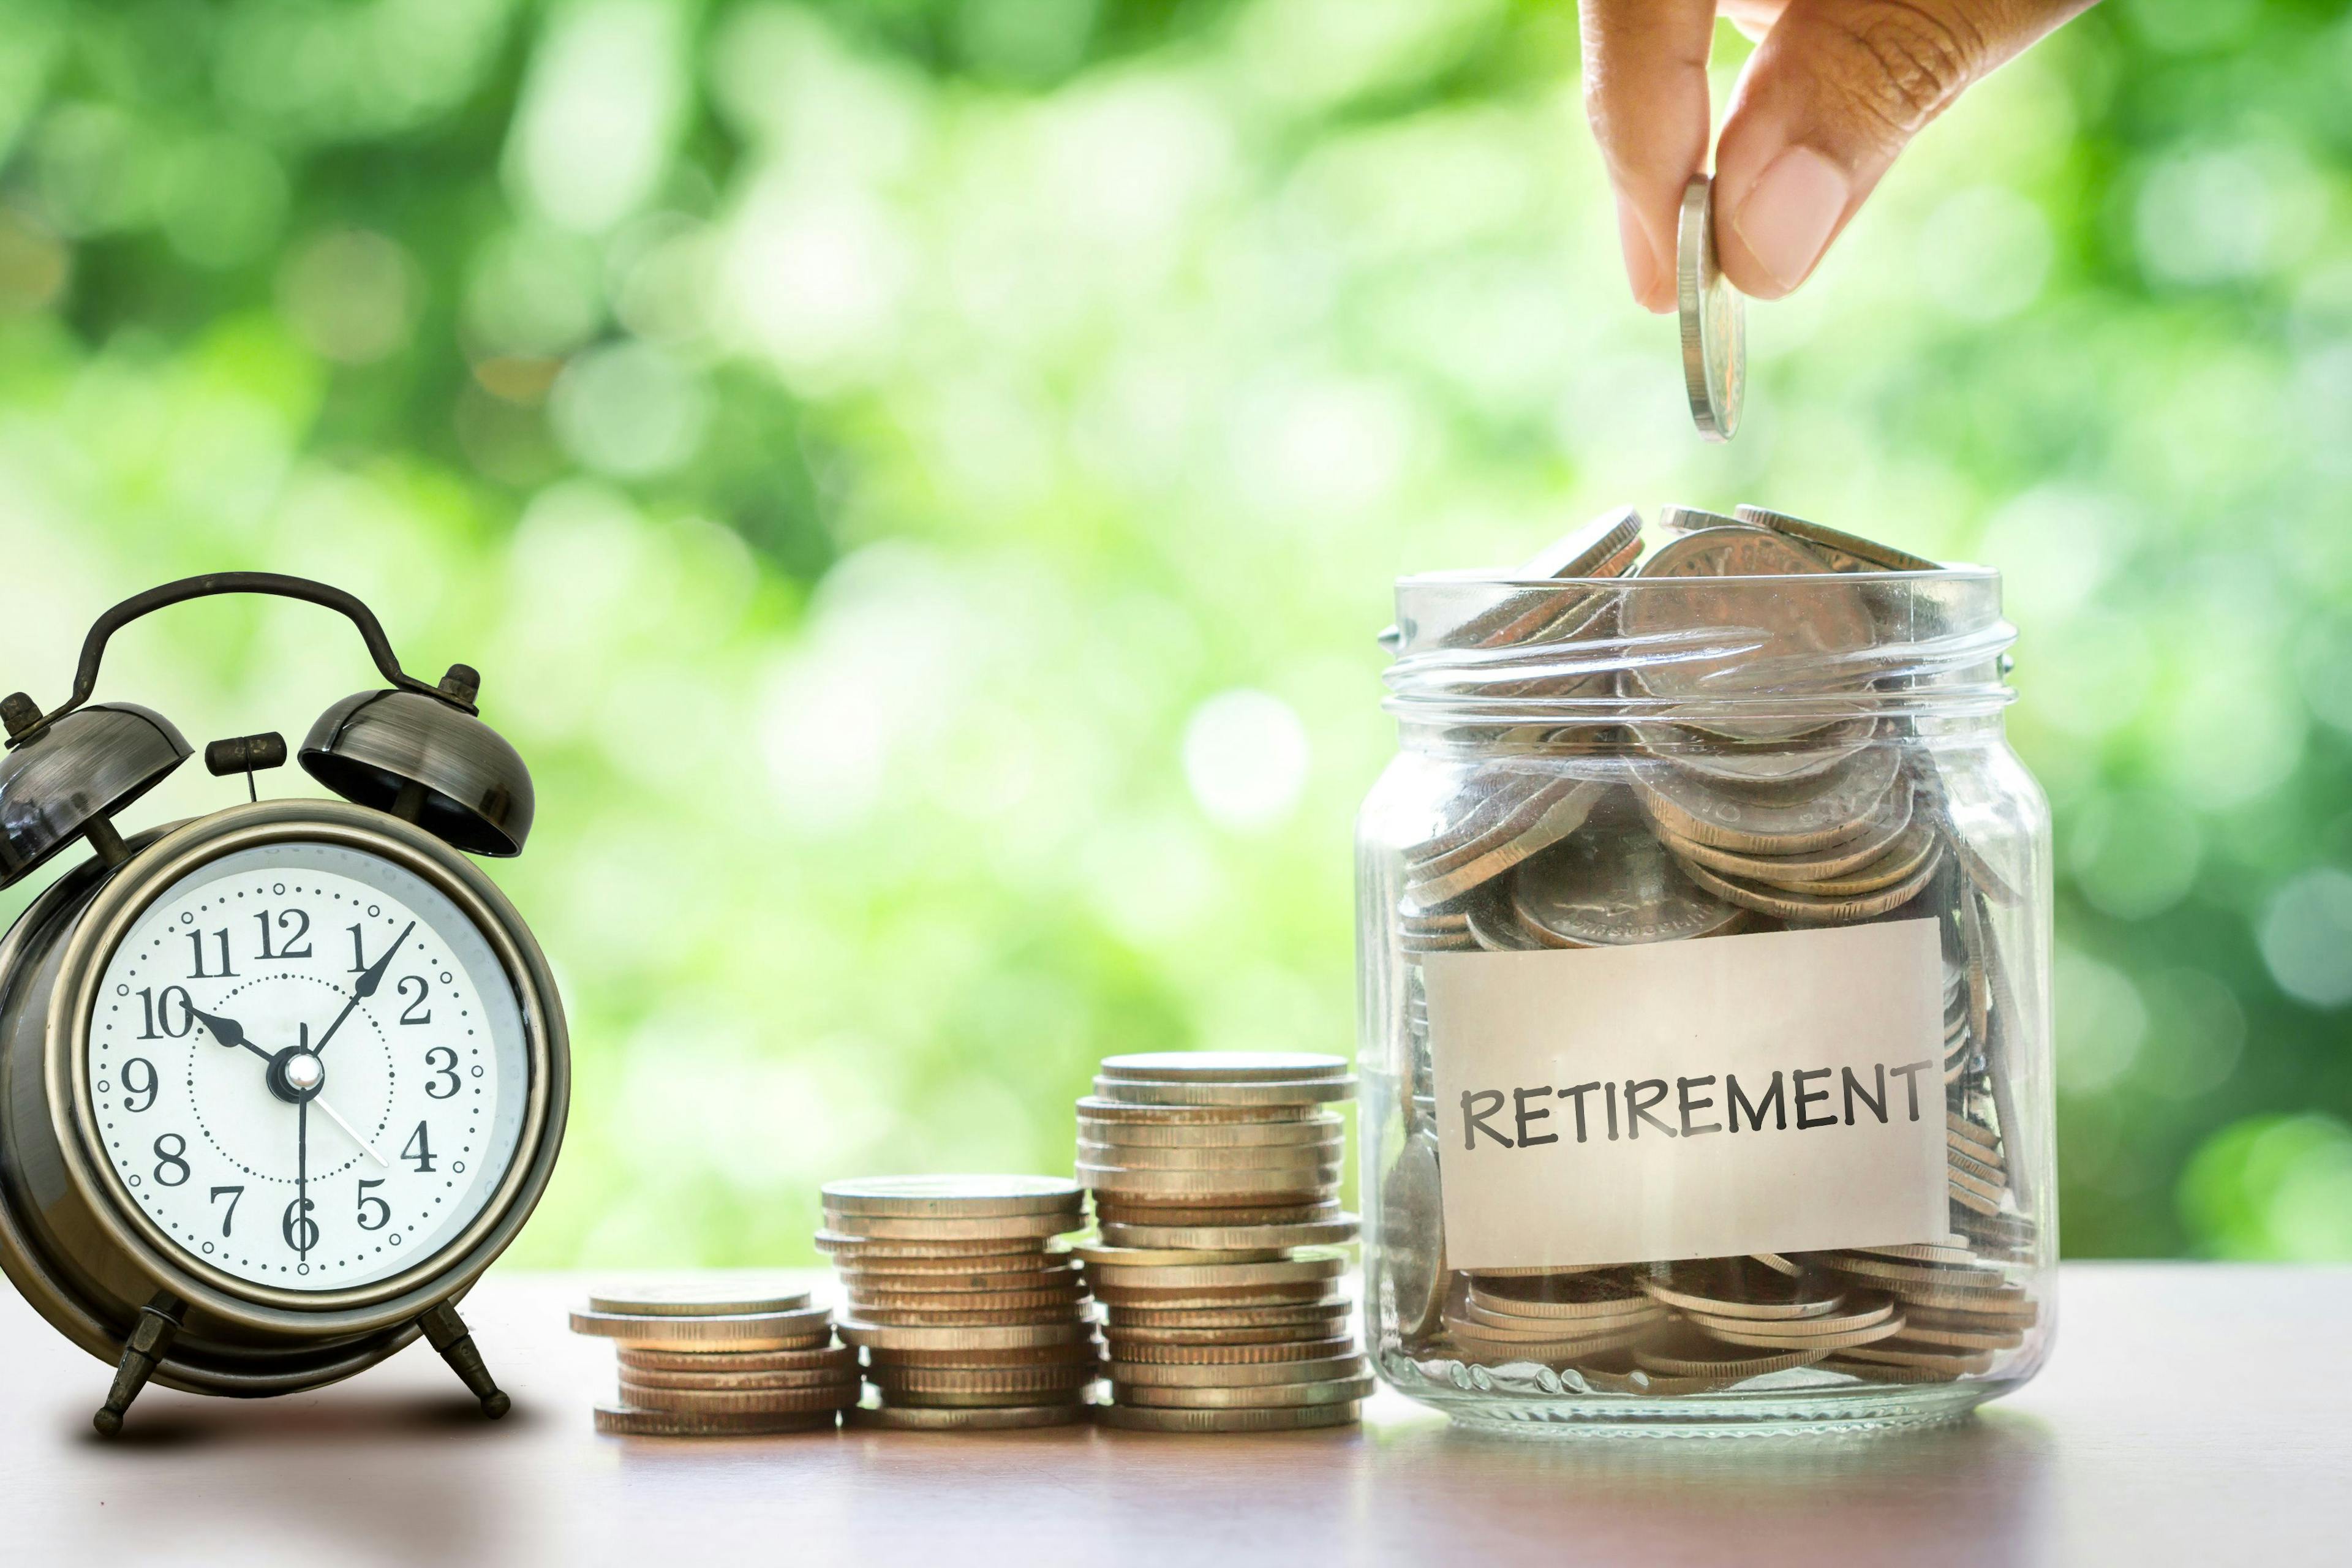 Cash balance plans are an effective way to catch up on retirement savings